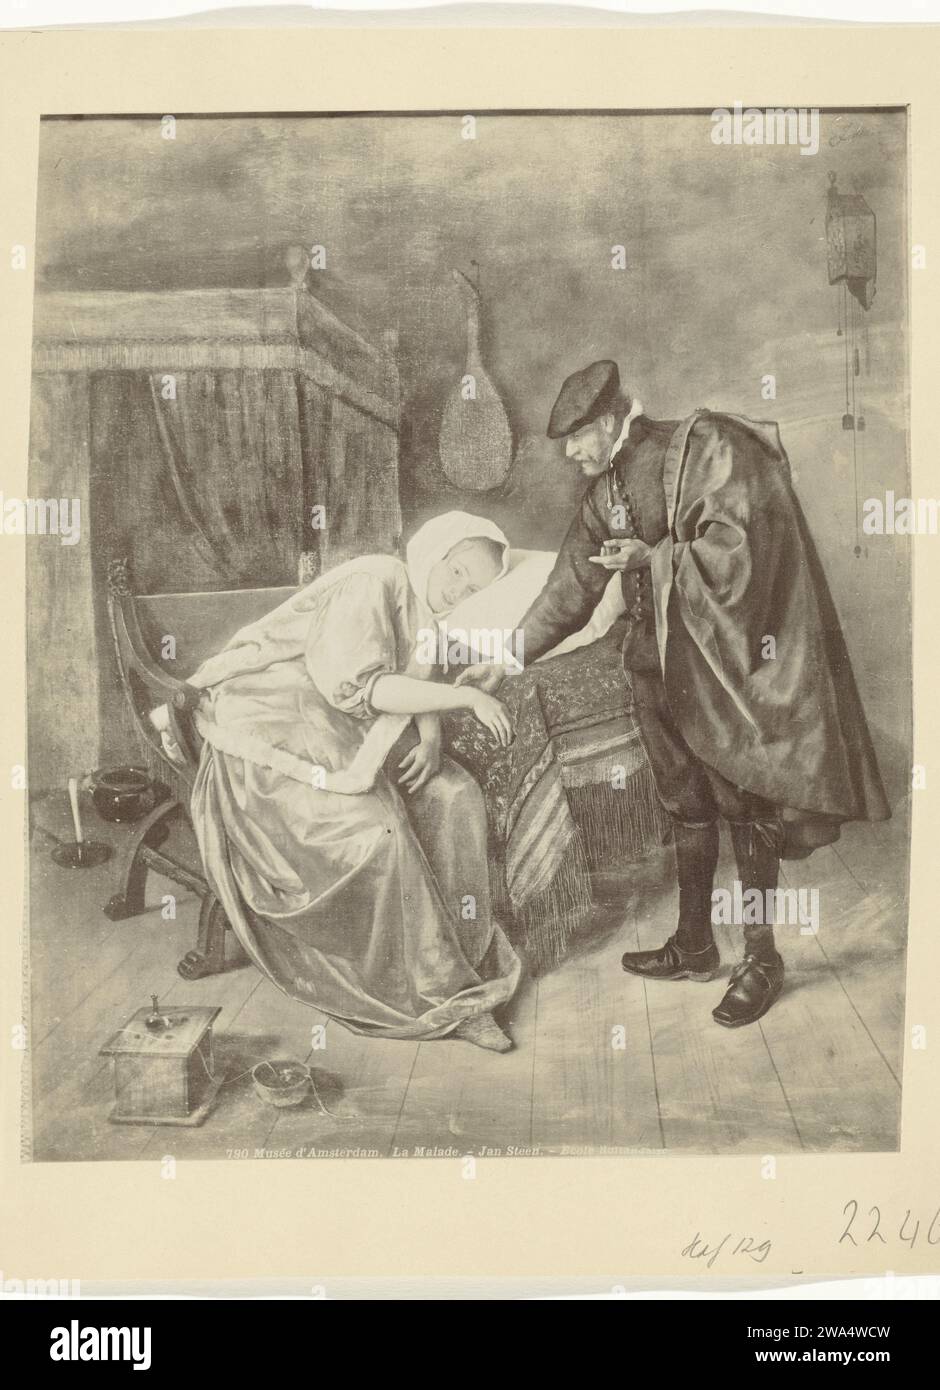 Photo production of the painting The sick woman by Jan Steen, Anonymous, after Jan Havicksz. Steen, 1867 - 1880 photograph  Amsterdampublisher: Paris paper. cardboard albumen print patient, sick person. physician, doctor Rijksmuseum Amsterdam Stock Photo